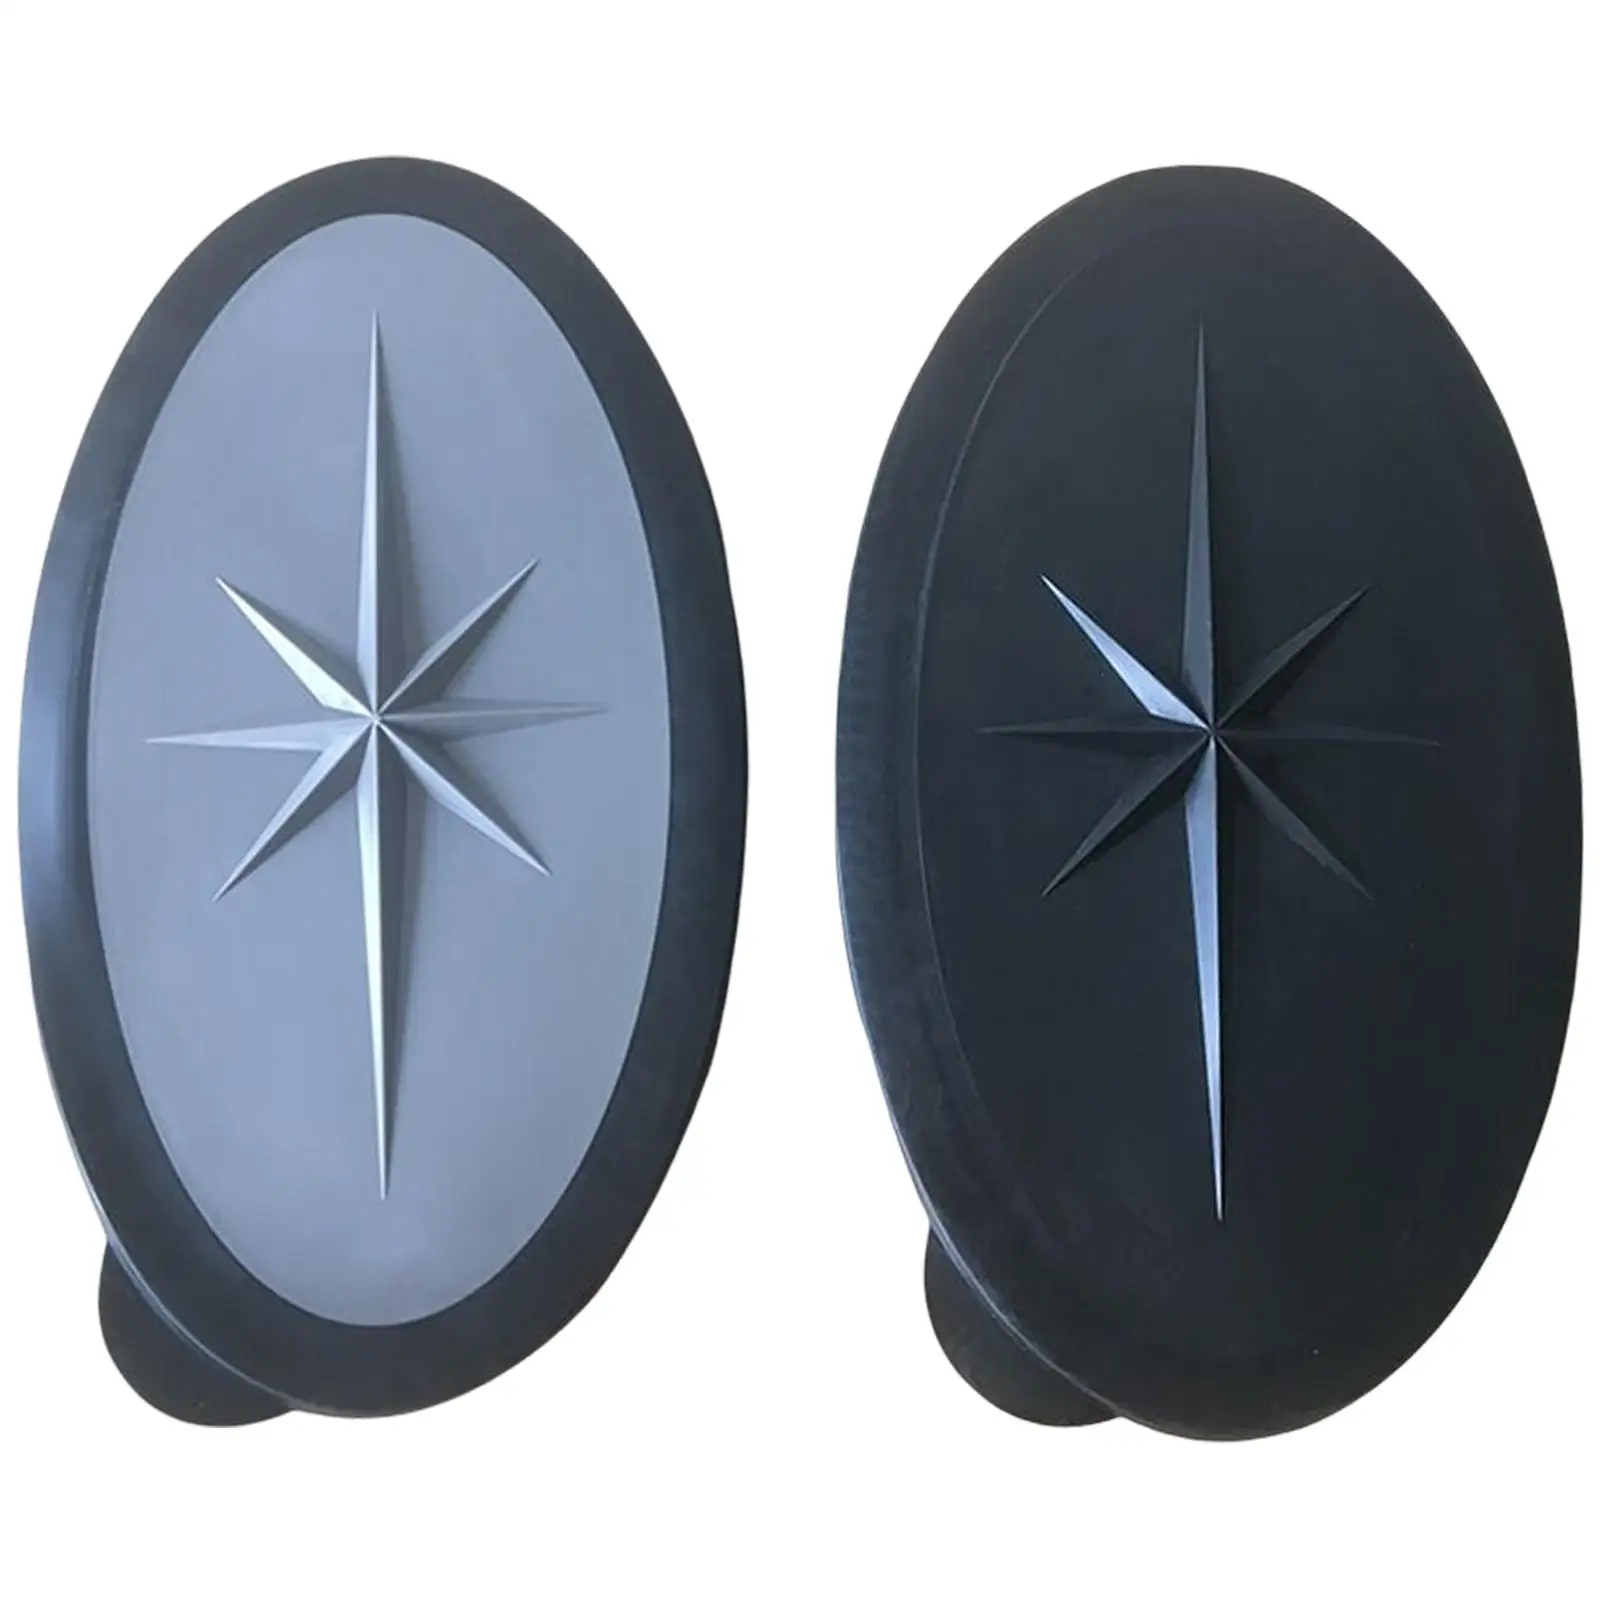 Oval Hatch Cover Non-Slip Plastic Boat Inspection Fits for Water Sport Yacht